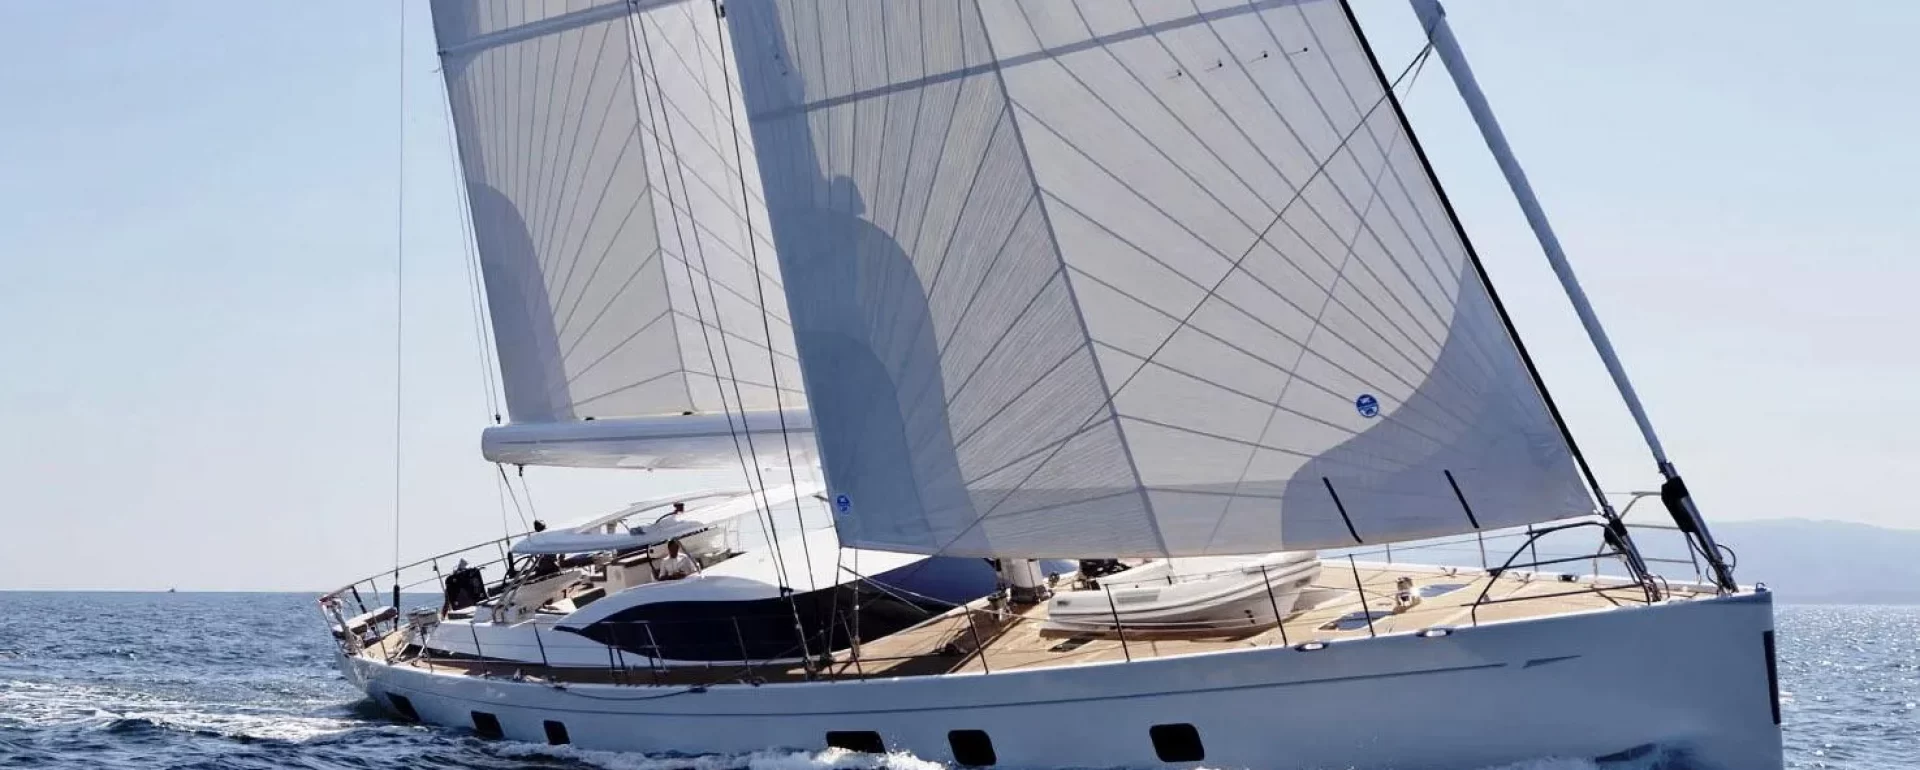 Sailing yacht for charter in Croatia